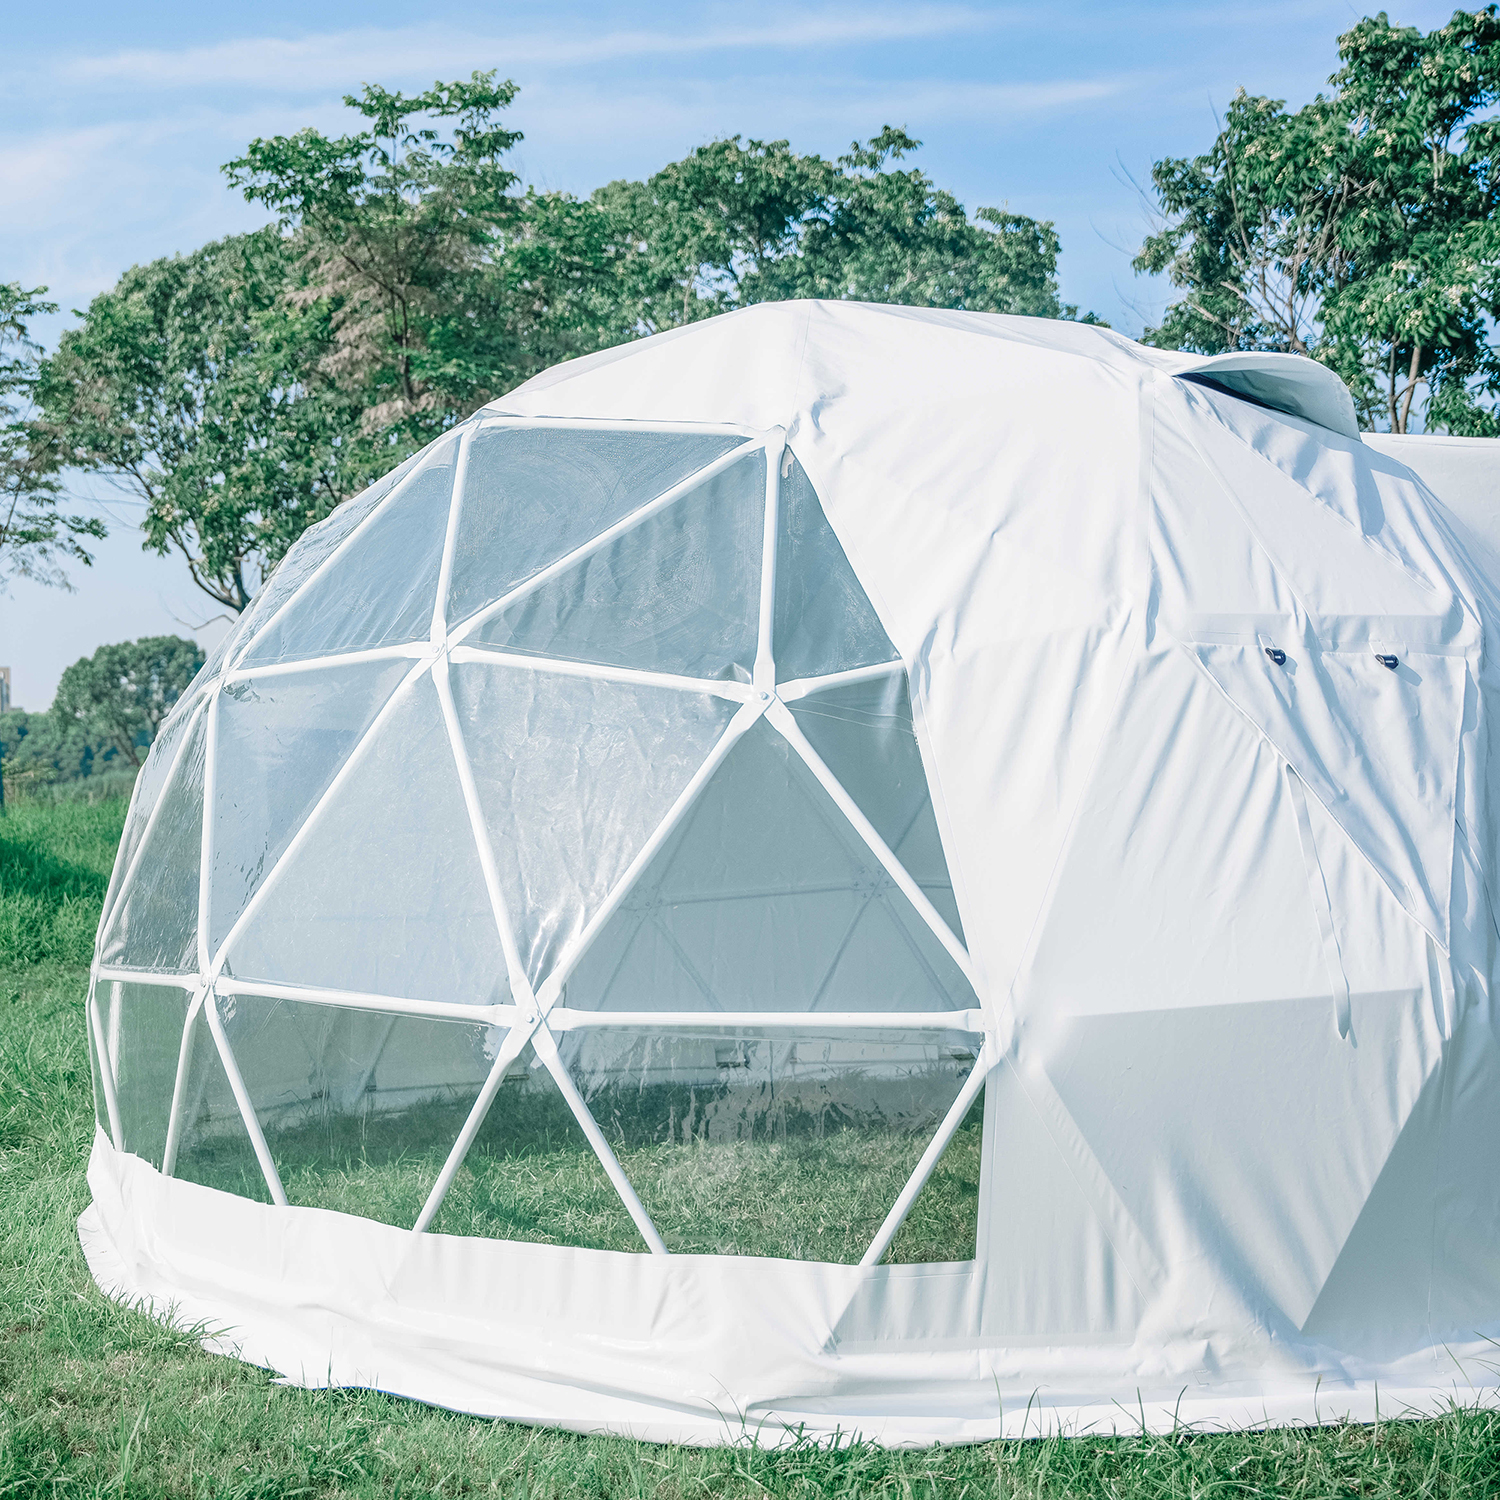 Key Considerations for Tent Manufacturers: The Importance of Tent Support Structure